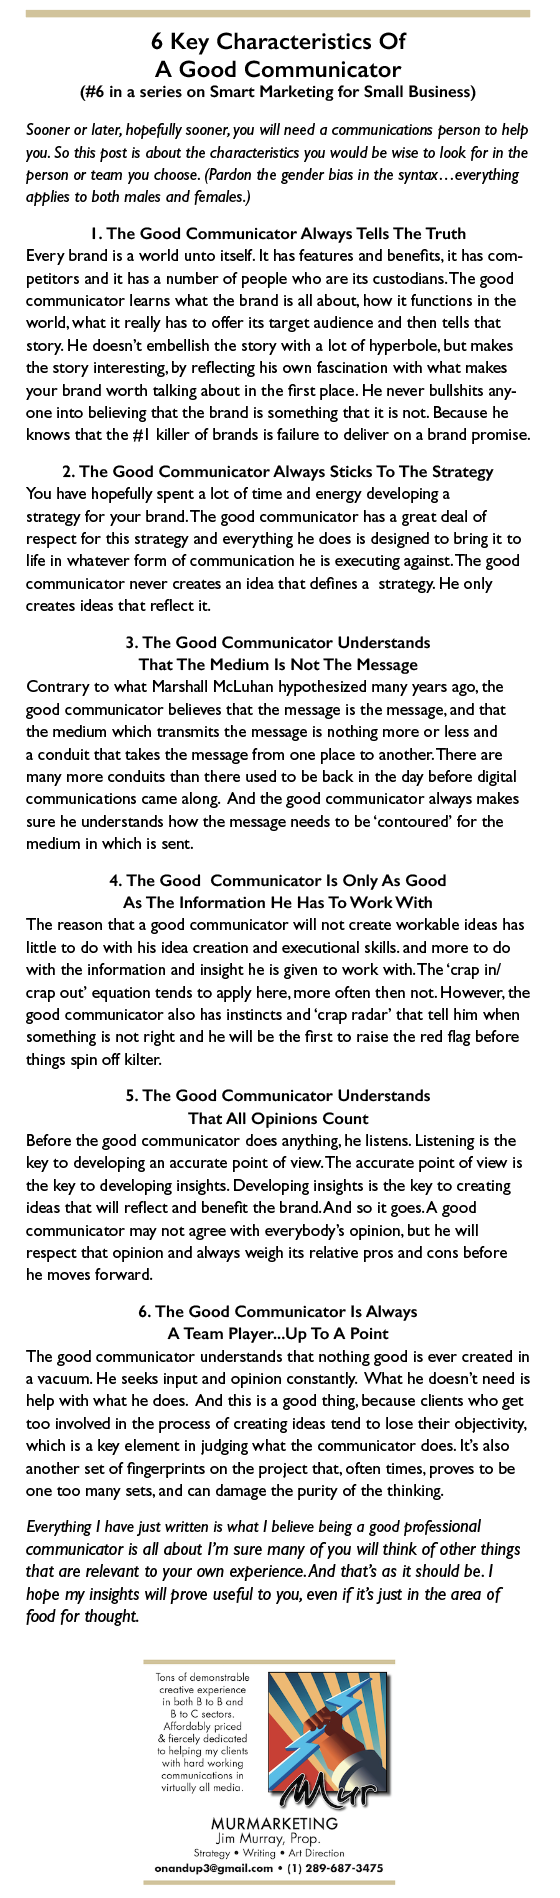 6 Key Characteristics Of

A Good Communicator
(#6 in a series on Smart Marketing for Small Business)

Sooner or later. hopefully sooner, you will need 0 communications person to help
you So this post i obout the characters tics you would be wise to look for i the
person or team you choose (Pardon the gender bios in the syntax everything
apphes to both males and females |

1. The Good Communicator Always Tells The Truth
Every brand 15 2 world unto sel ht has features and benefits. it has com-
pettors and t has a number of people who are its custodans The good
communicator learns what the brand 1s all about, how 1t functions in the
world. what it really has to offer its target audwence and then tells that
story He doesn't embellish the story with a lot of hyperbole, but makes
the story interesting, by reflecting hs own fascination with what makes
your brand worth talking about in the first piace He never bullshits any
one into bebeving that the brand rs something that 1t is not Because he
knows that the #1 killer of brands 1s fadure to debver on a brand promise

2. The Good Communicator Always Sticks To The Strategy
You have hopefully spent a lot of me and energy developng a
strategy for your brand The good communicator has a great deal of
respect for thes strategy and everything he does 1 designed to bring it to
Ife in whatever form of communication he 1s executing aganst The good
communicator never creates an dea that defines 3 strategy He only
creates eas that reflect it

3. The Good Communicator Understands
That The Medium Is Not The Message

Contrary to what Marshall McLuhan hypothesized many years ago. the
£004 communicator bekeves that the message 1s the message. and that
the medium which transmits the message 1s nothing more or less and
2 condurt that takes the message from one place to another There are
many more condurts than there used to be back mn the day before digital
communications came along And the good commurscator always makes
sure he understands how the message needs to be ‘contoured for the
medium in which 13 sent

4. The Good Communicator Is Only As Good
As The Information He Has To Work With

The reason that a good communicator will not create workable eas has
Ide to do with hrs ea creavon and execubonal skils and more to do
with the information and nsight he 1s given to work with The ‘crap in/
crap out’ equabon tends to apply here. more often then not However. the
£00d communicator also has insuncs and ‘crap radar” that tell ham when
something 5 not right and he will be the first to raise the red flag before
things spin off kalter

5. The Good Communicator Understands
That All Opinions Count

Before the good communicator does anything, he listens. Listening 1s the
key to developing an accurate pont of view The accurate pont of view 13
the key to developing insights Developmg insights 1s the key to creaung
wdeas that wil reflect and benefic the brand And so 1t goes A good
communicator may not agree with everybody's opinion. but he will
respect that opinion and always weigh its relative pros and cons before
he moves forward

6. The Good Communicator Is Always
A Team Player. Up To A Point

The good communicator understands that nothing good 1s ever created m
vacuum He seeks mput and opineon constantly What he doesn't need 1s
help with what he does And thes 13 2 good thing because chents who get
100 mvolved in the process of creating wdeas tend to lose ther obrectivity.
which 15 2 key element in pdging what the communscator does Its also
another set of fingerprints on the project that. often umes. proves to be
one 100 many sets. and can damage the purity of the thinking,

Everything | hove pst written 5 whot | bebeve being o good professional
communicator ts off about I'm sure many of you will think of other things
that are relevant to your own experience. And that's as it should be |
hope my insights will prove usefid to you, even if it's just in the area of
food for thought - 6 Key Characteristics Of

A Good Communicator
(#6 in a series on Smart Marketing for Small Business)

Sooner or later. hopefully sooner, you will need 0 communications person to help
you So this post i obout the characters tics you would be wise to look for i the
person or team you choose (Pardon the gender bios in the syntax everything
apphes to both males and females |

1. The Good Communicator Always Tells The Truth
Every brand 15 2 world unto sel ht has features and benefits. it has com-
pettors and t has a number of people who are its custodans The good
communicator learns what the brand 1s all about, how 1t functions in the
world. what it really has to offer its target audwence and then tells that
story He doesn't embellish the story with a lot of hyperbole, but makes
the story interesting, by reflecting hs own fascination with what makes
your brand worth talking about in the first piace He never bullshits any
one into bebeving that the brand rs something that 1t is not Because he
knows that the #1 killer of brands 1s fadure to debver on a brand promise

2. The Good Communicator Always Sticks To The Strategy
You have hopefully spent a lot of me and energy developng a
strategy for your brand The good communicator has a great deal of
respect for thes strategy and everything he does 1 designed to bring it to
Ife in whatever form of communication he 1s executing aganst The good
communicator never creates an dea that defines 3 strategy He only
creates eas that reflect it

3. The Good Communicator Understands
That The Medium Is Not The Message

Contrary to what Marshall McLuhan hypothesized many years ago. the
£004 communicator bekeves that the message 1s the message. and that
the medium which transmits the message 1s nothing more or less and
2 condurt that takes the message from one place to another There are
many more condurts than there used to be back mn the day before digital
communications came along And the good commurscator always makes
sure he understands how the message needs to be ‘contoured for the
medium in which 13 sent

4. The Good Communicator Is Only As Good
As The Information He Has To Work With

The reason that a good communicator will not create workable eas has
Ide to do with hrs ea creavon and execubonal skils and more to do
with the information and nsight he 1s given to work with The ‘crap in/
crap out’ equabon tends to apply here. more often then not However. the
£00d communicator also has insuncs and ‘crap radar” that tell ham when
something 5 not right and he will be the first to raise the red flag before
things spin off kalter

5. The Good Communicator Understands
That All Opinions Count

Before the good communicator does anything, he listens. Listening 1s the
key to developing an accurate pont of view The accurate pont of view 13
the key to developing insights Developmg insights 1s the key to creaung
wdeas that wil reflect and benefic the brand And so 1t goes A good
communicator may not agree with everybody's opinion. but he will
respect that opinion and always weigh its relative pros and cons before
he moves forward

6. The Good Communicator Is Always
A Team Player. Up To A Point

The good communicator understands that nothing good 1s ever created m
vacuum He seeks mput and opineon constantly What he doesn't need 1s
help with what he does And thes 13 2 good thing because chents who get
100 mvolved in the process of creating wdeas tend to lose ther obrectivity.
which 15 2 key element in pdging what the communscator does Its also
another set of fingerprints on the project that. often umes. proves to be
one 100 many sets. and can damage the purity of the thinking,

Everything | hove pst written 5 whot | bebeve being o good professional
communicator ts off about I'm sure many of you will think of other things
that are relevant to your own experience. And that's as it should be |
hope my insights will prove usefid to you, even if it's just in the area of
food for thought